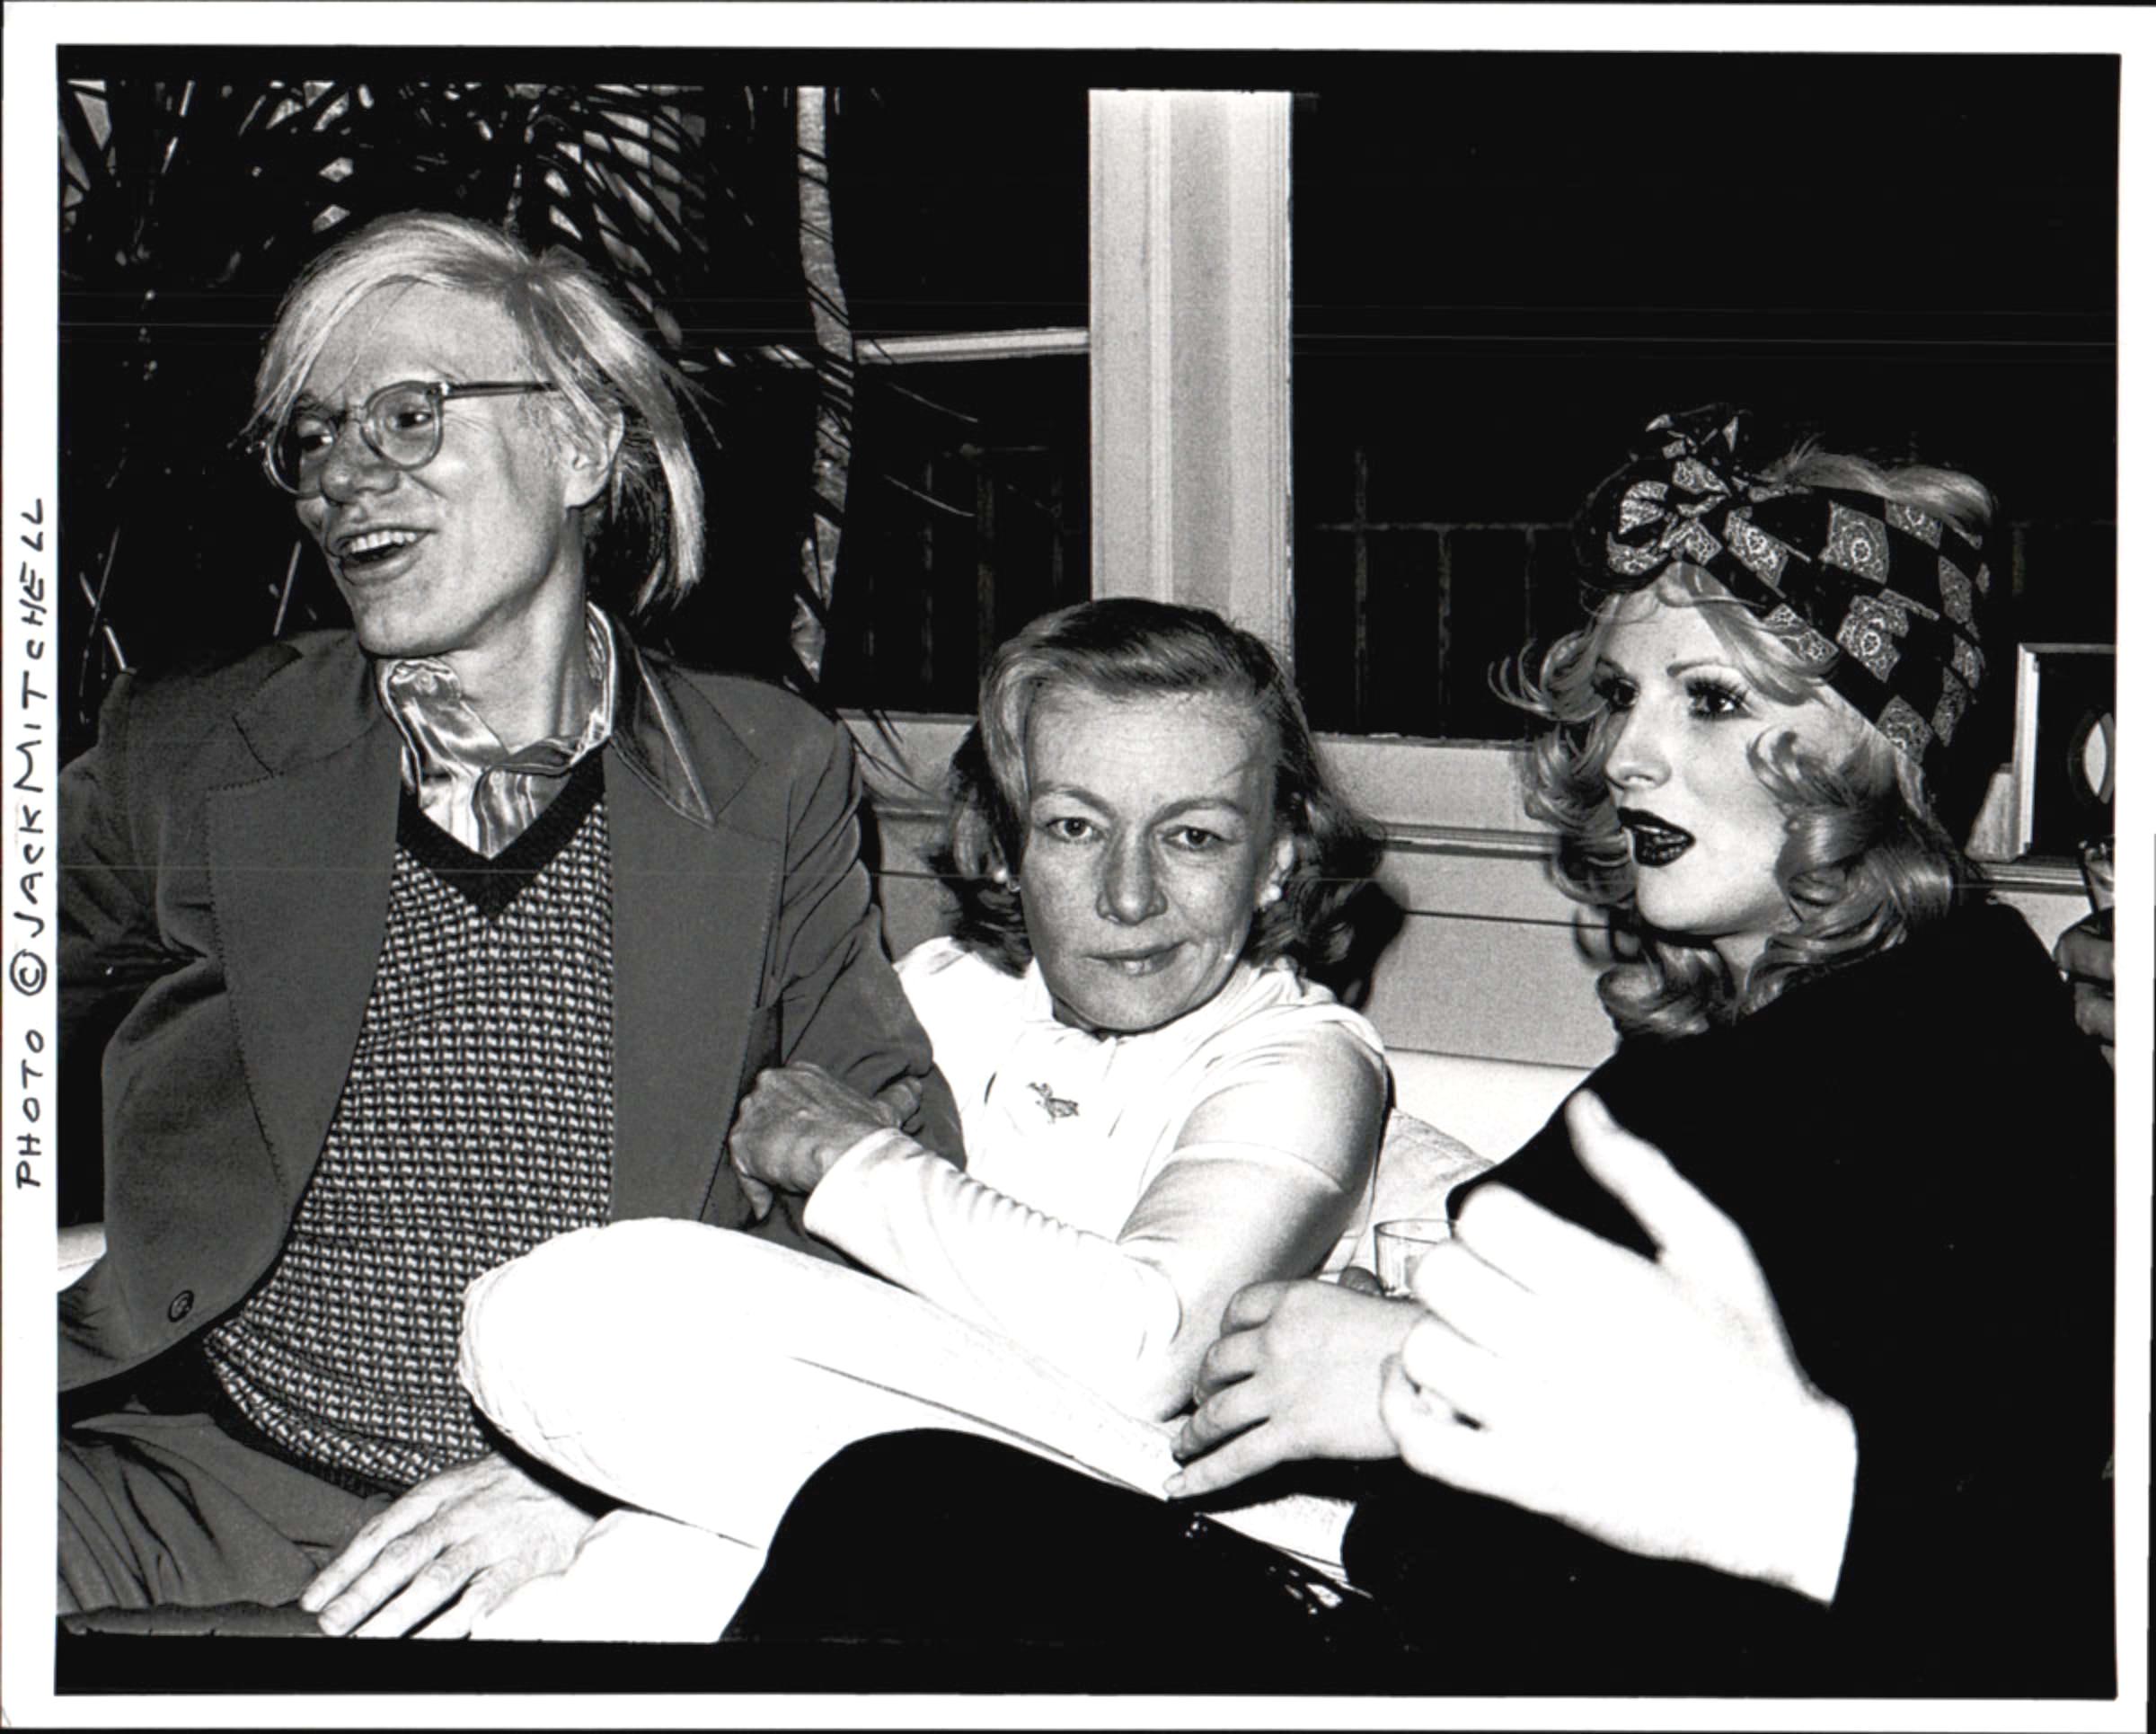 Jack Mitchell Black and White Photograph - Andy Warhol, noir film star Veronica Lake & Candy Darling at a cocktail party